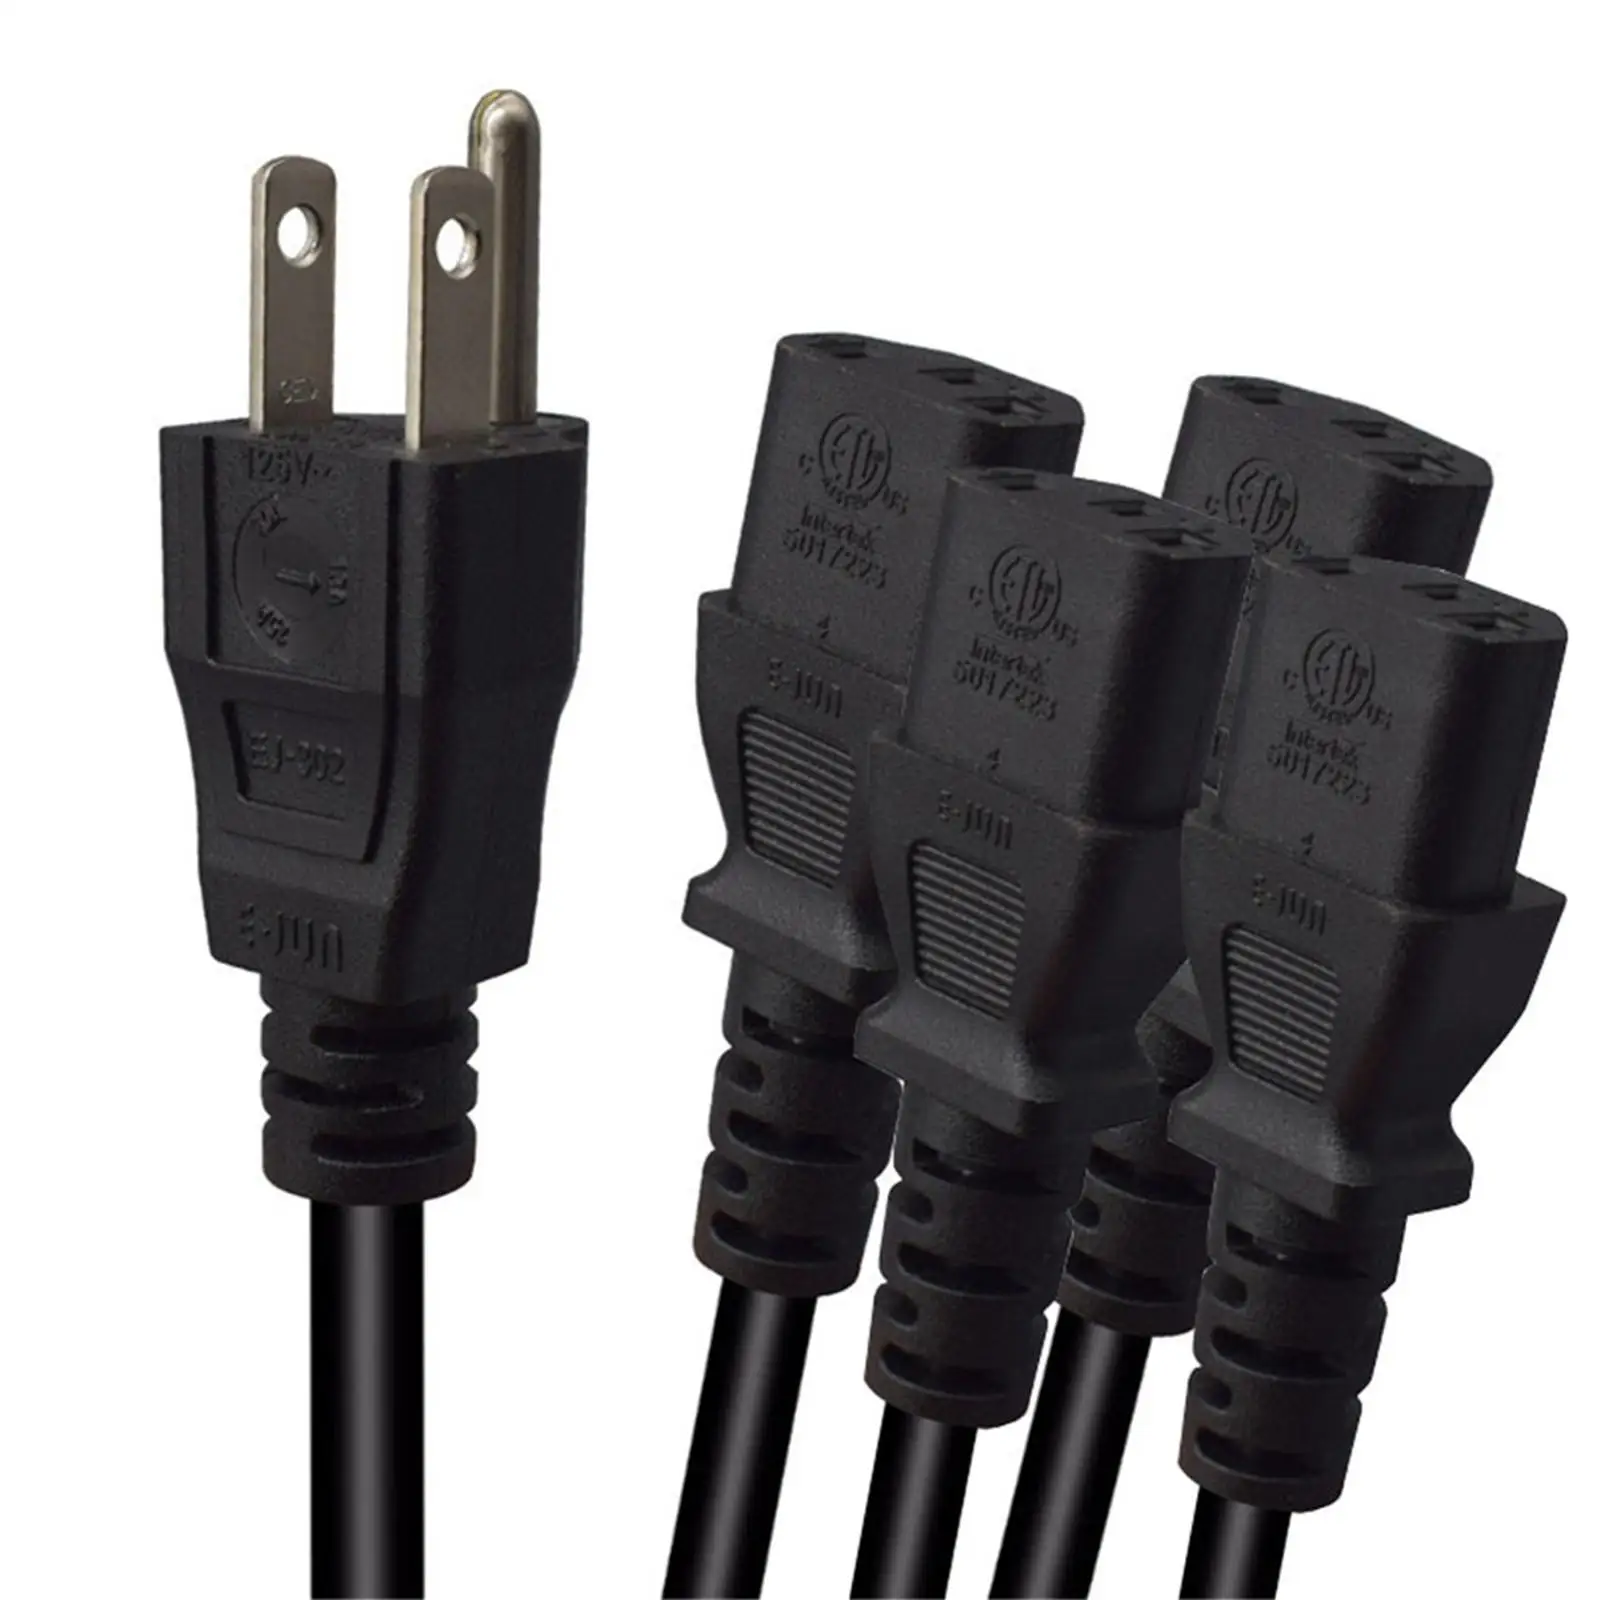 3 Prong 1 to 4 Outlet Power Cord American Standard Plug 125/250V Cable Connector 5-15P Male to IEC320 Female Adapter for Indoor